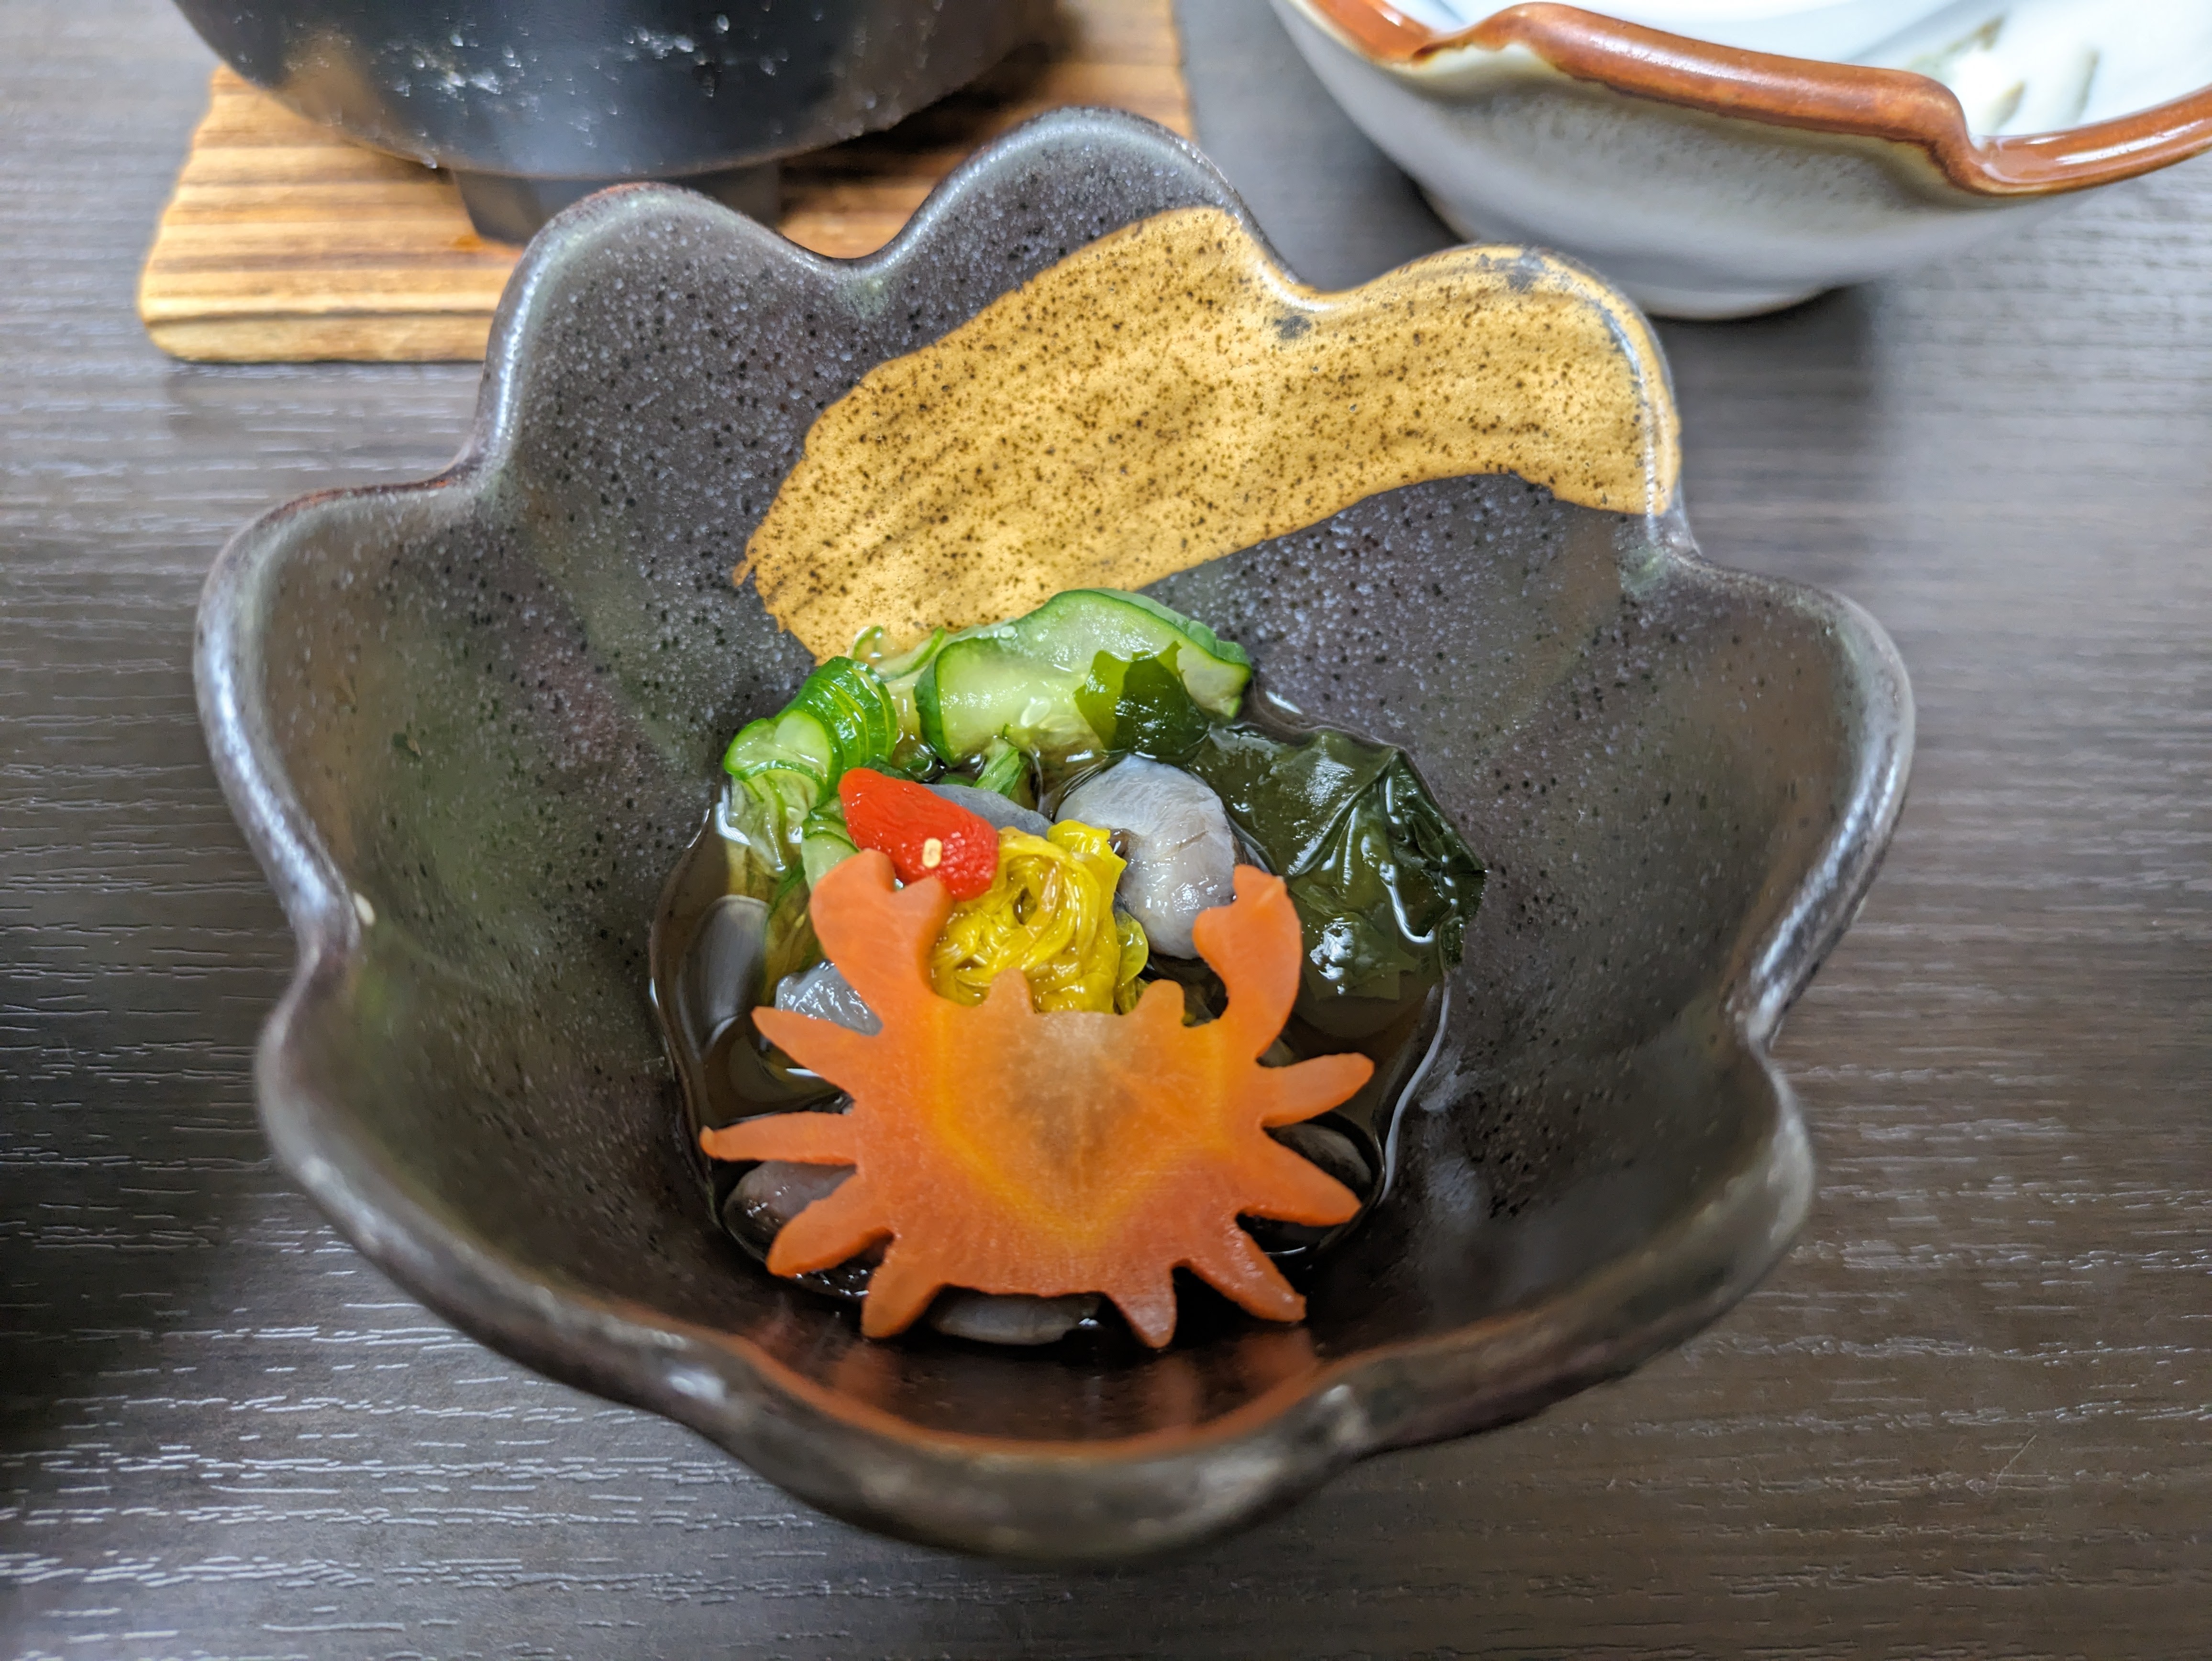 A small bowl of pickled vegetables and seafood with a slice of carrot cut into the shape of a crab.